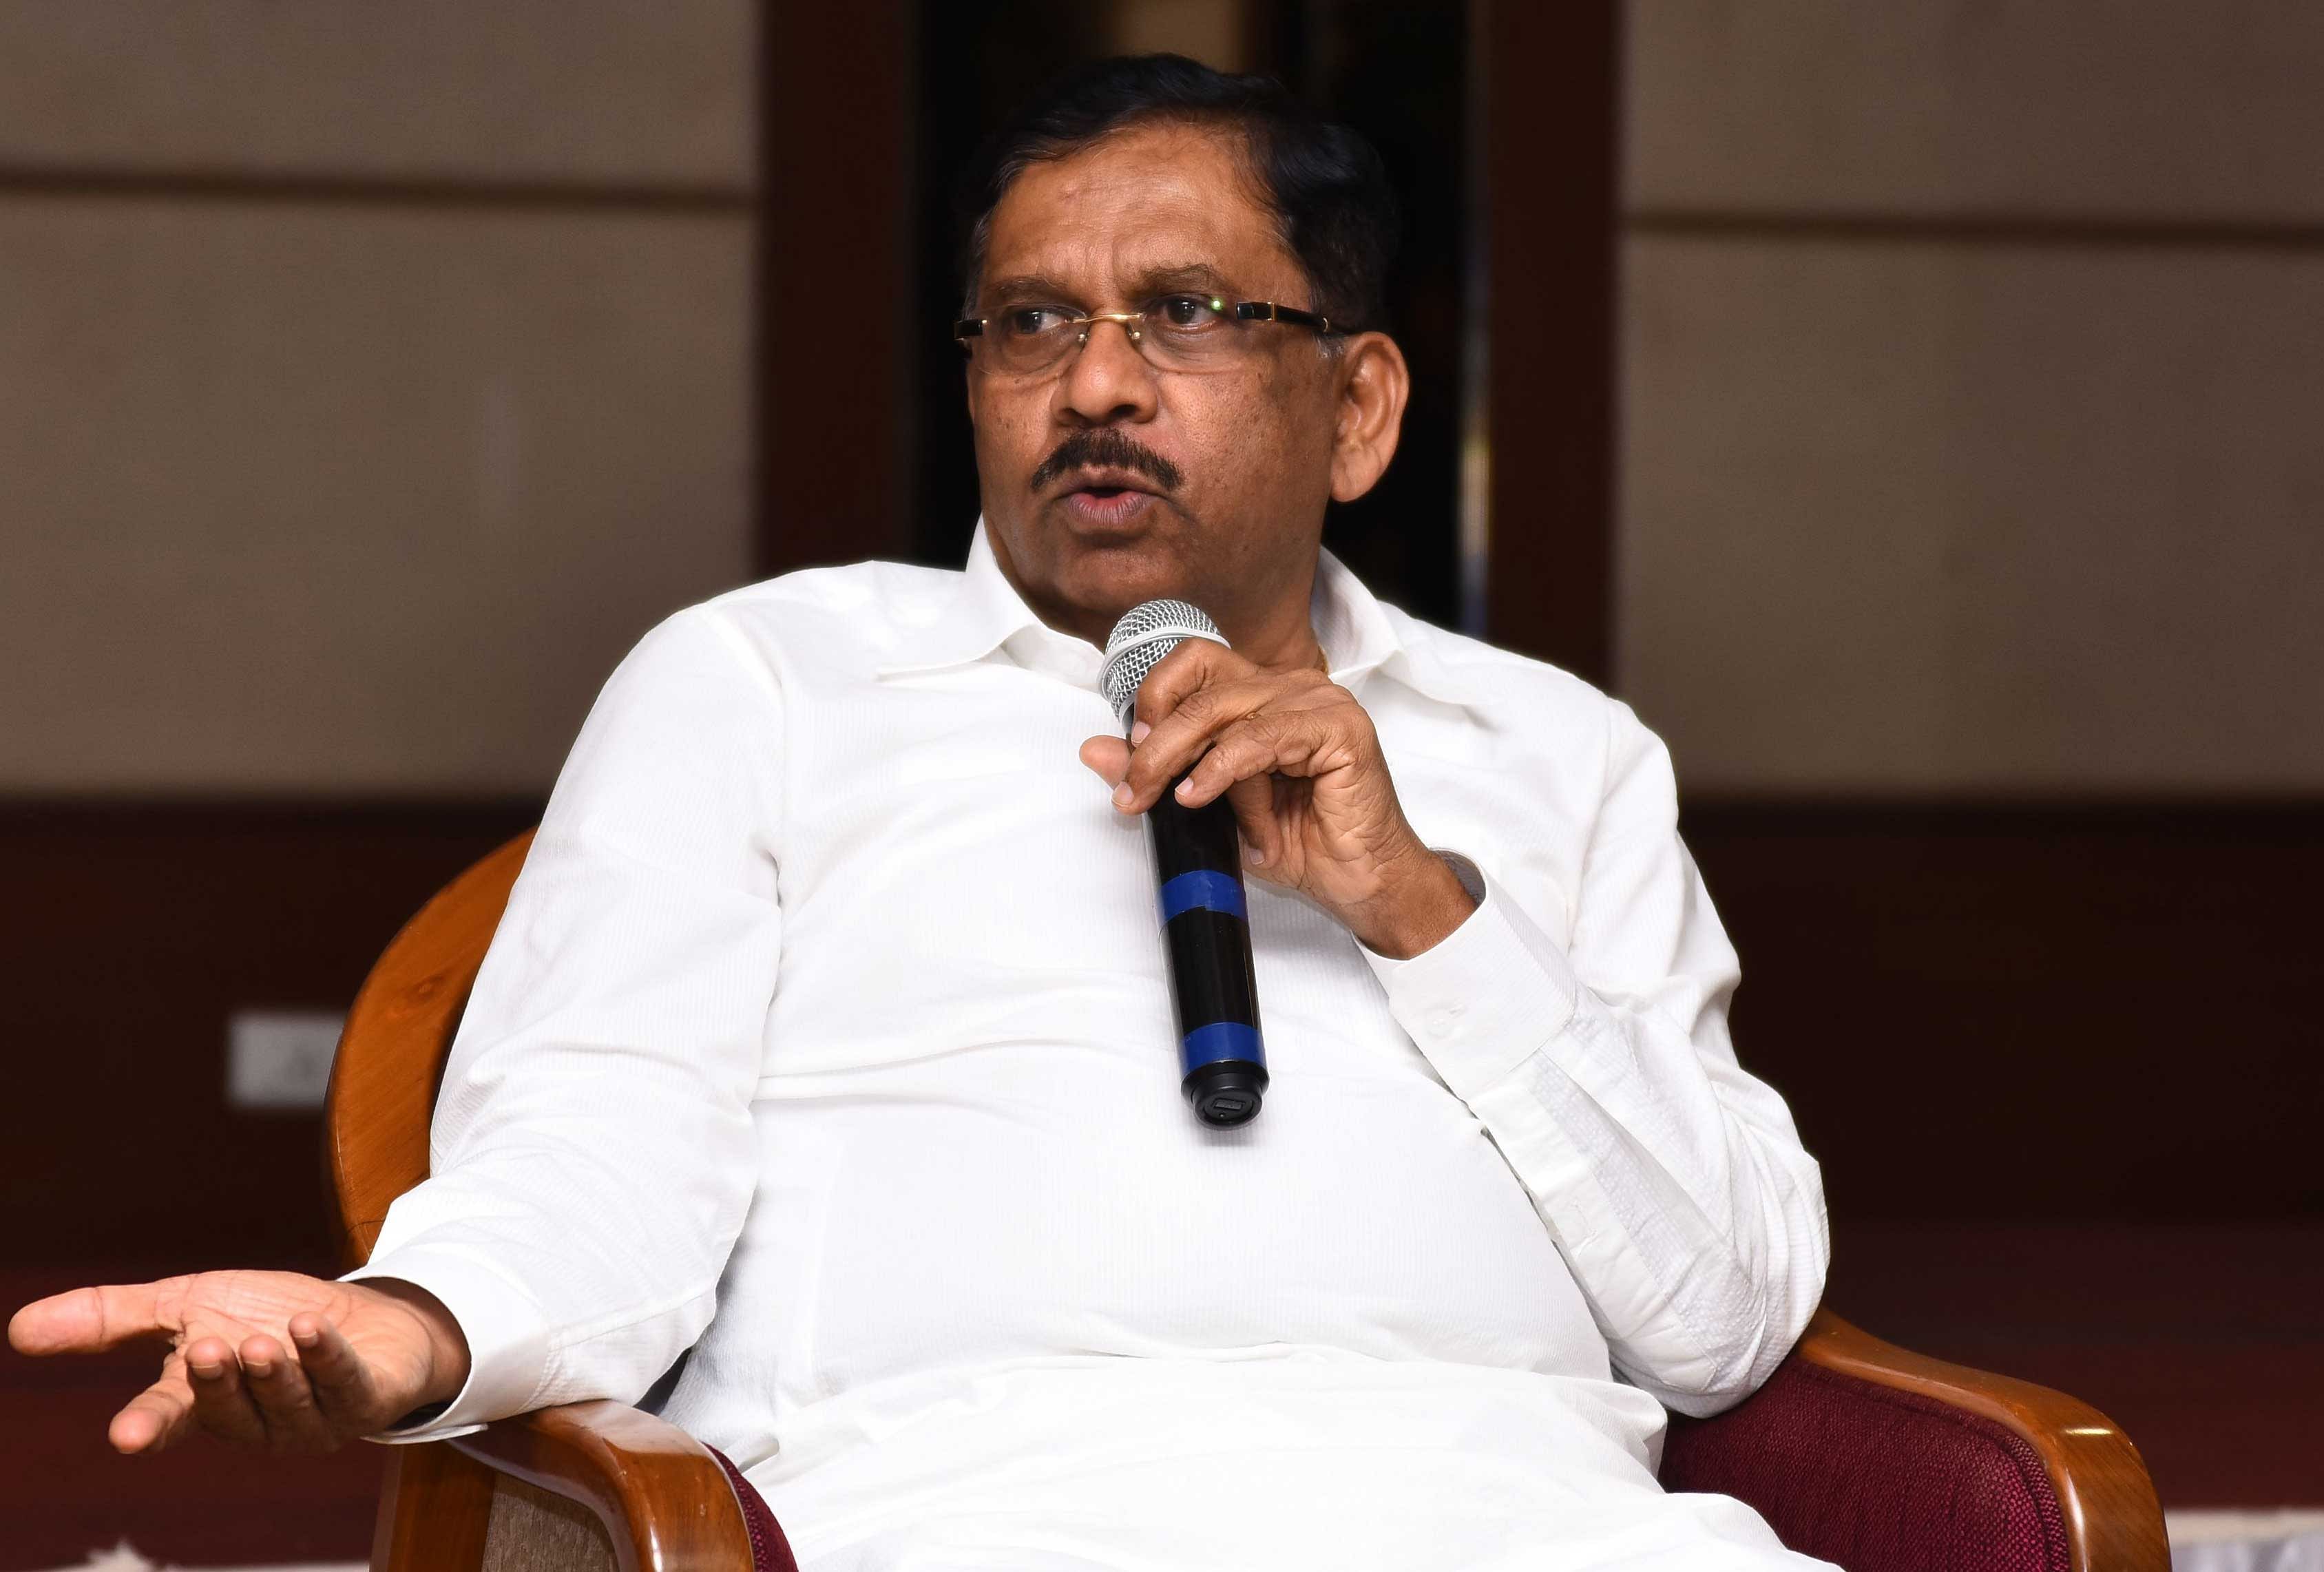 Parameshwara, who is touring France to study waste-to-energy management, inaugurated a state-of-the-art waste sorting centre of 500 tonnes per day capacity at Le Puy-en-Velay town in southern France on Sunday. (DH File Photo)